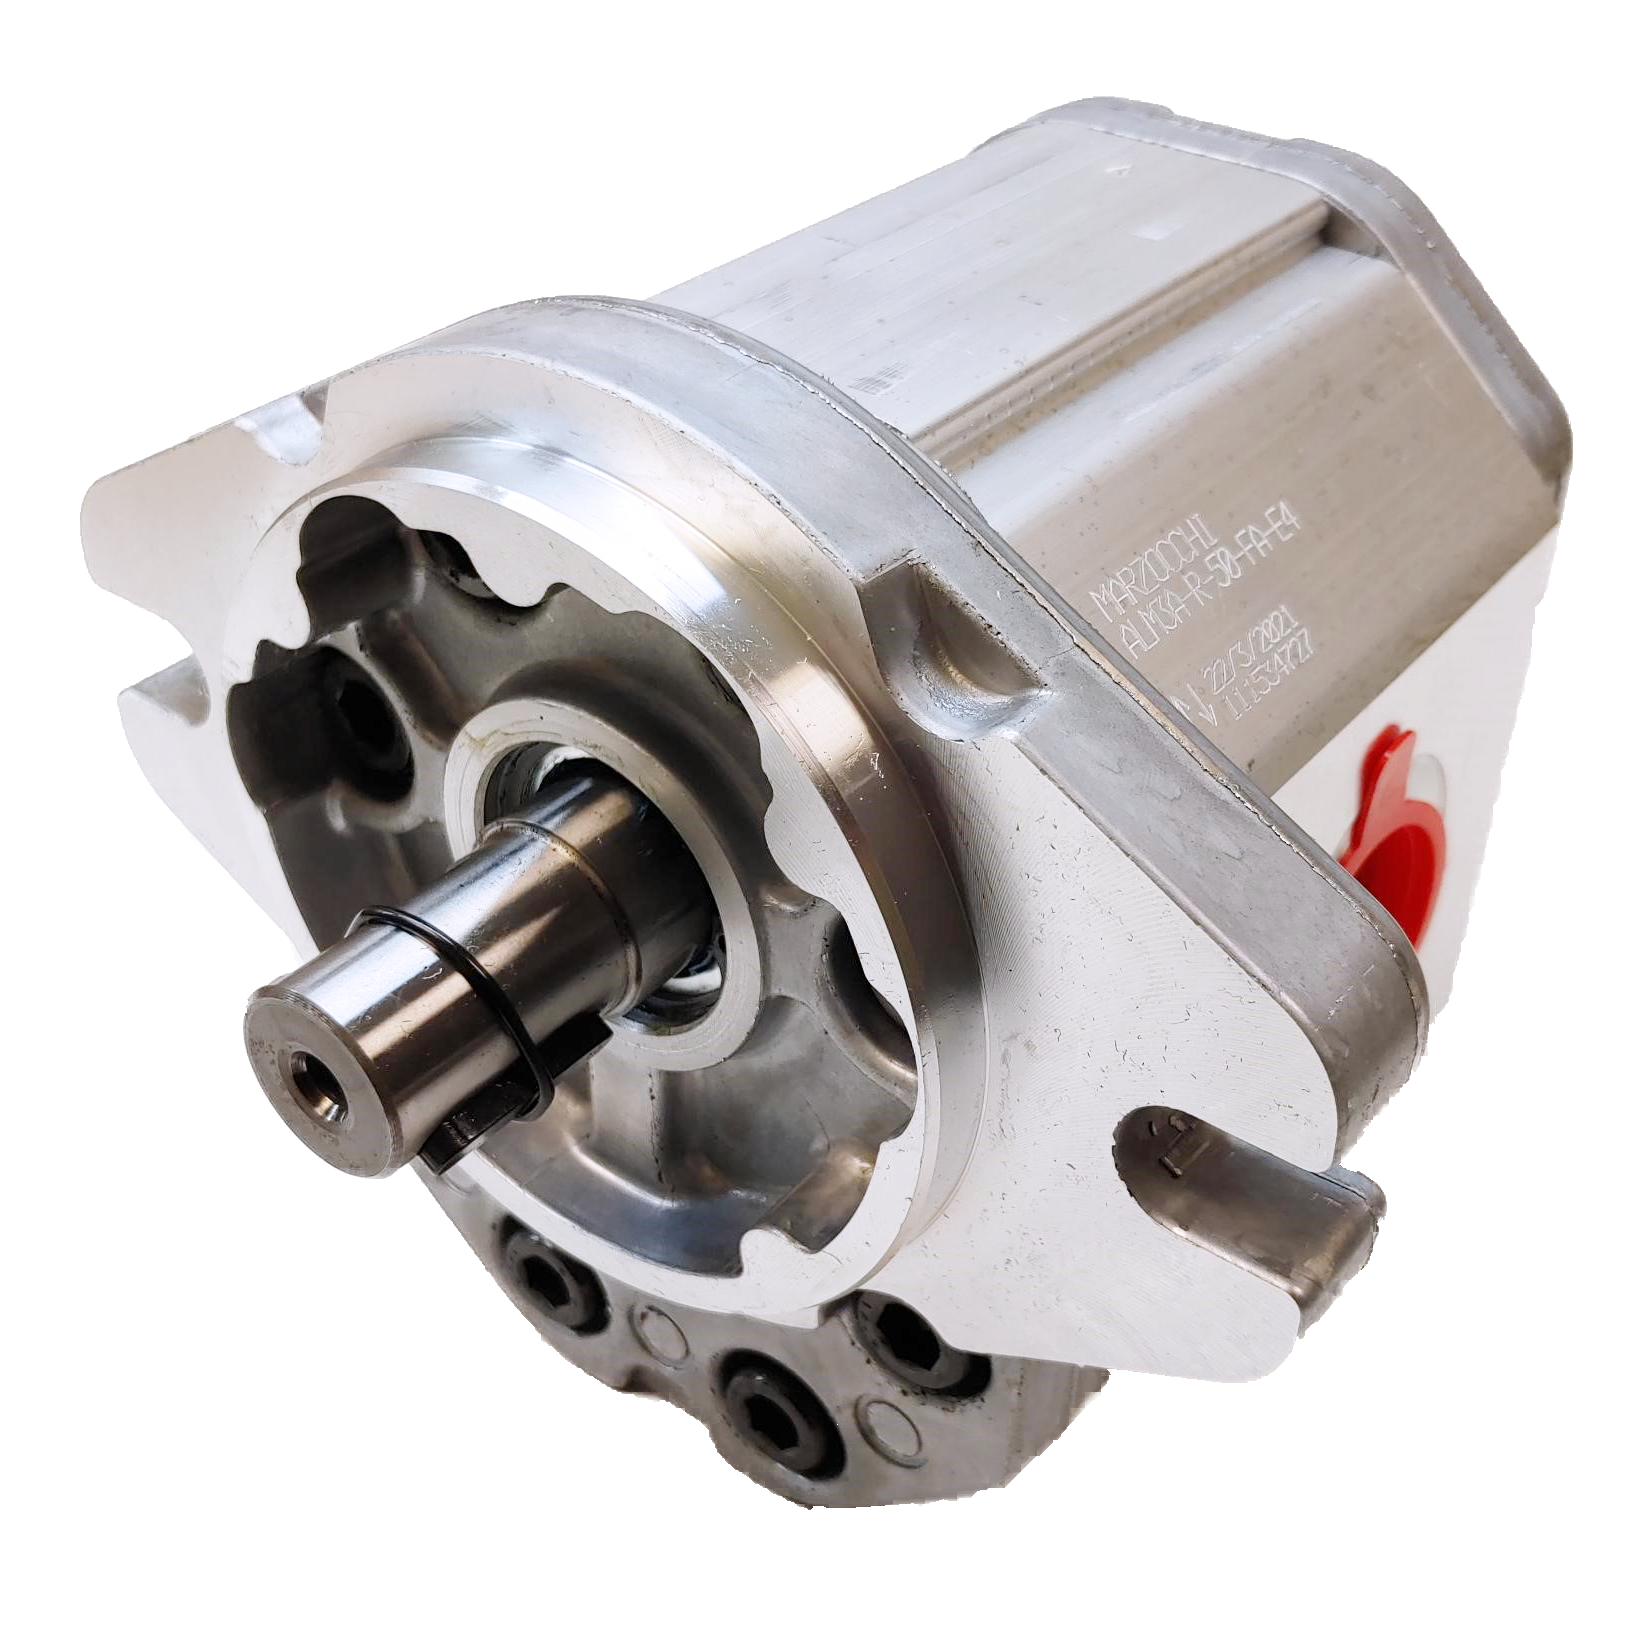 ALM3A-R-80-E4 : Marzocchi Gear Motor, Bidirectional, 52cc, 2900psi rated, 2500RPM, 1" Code 61 ports, 5/8" Bore x 5/32" Keyed Shaft